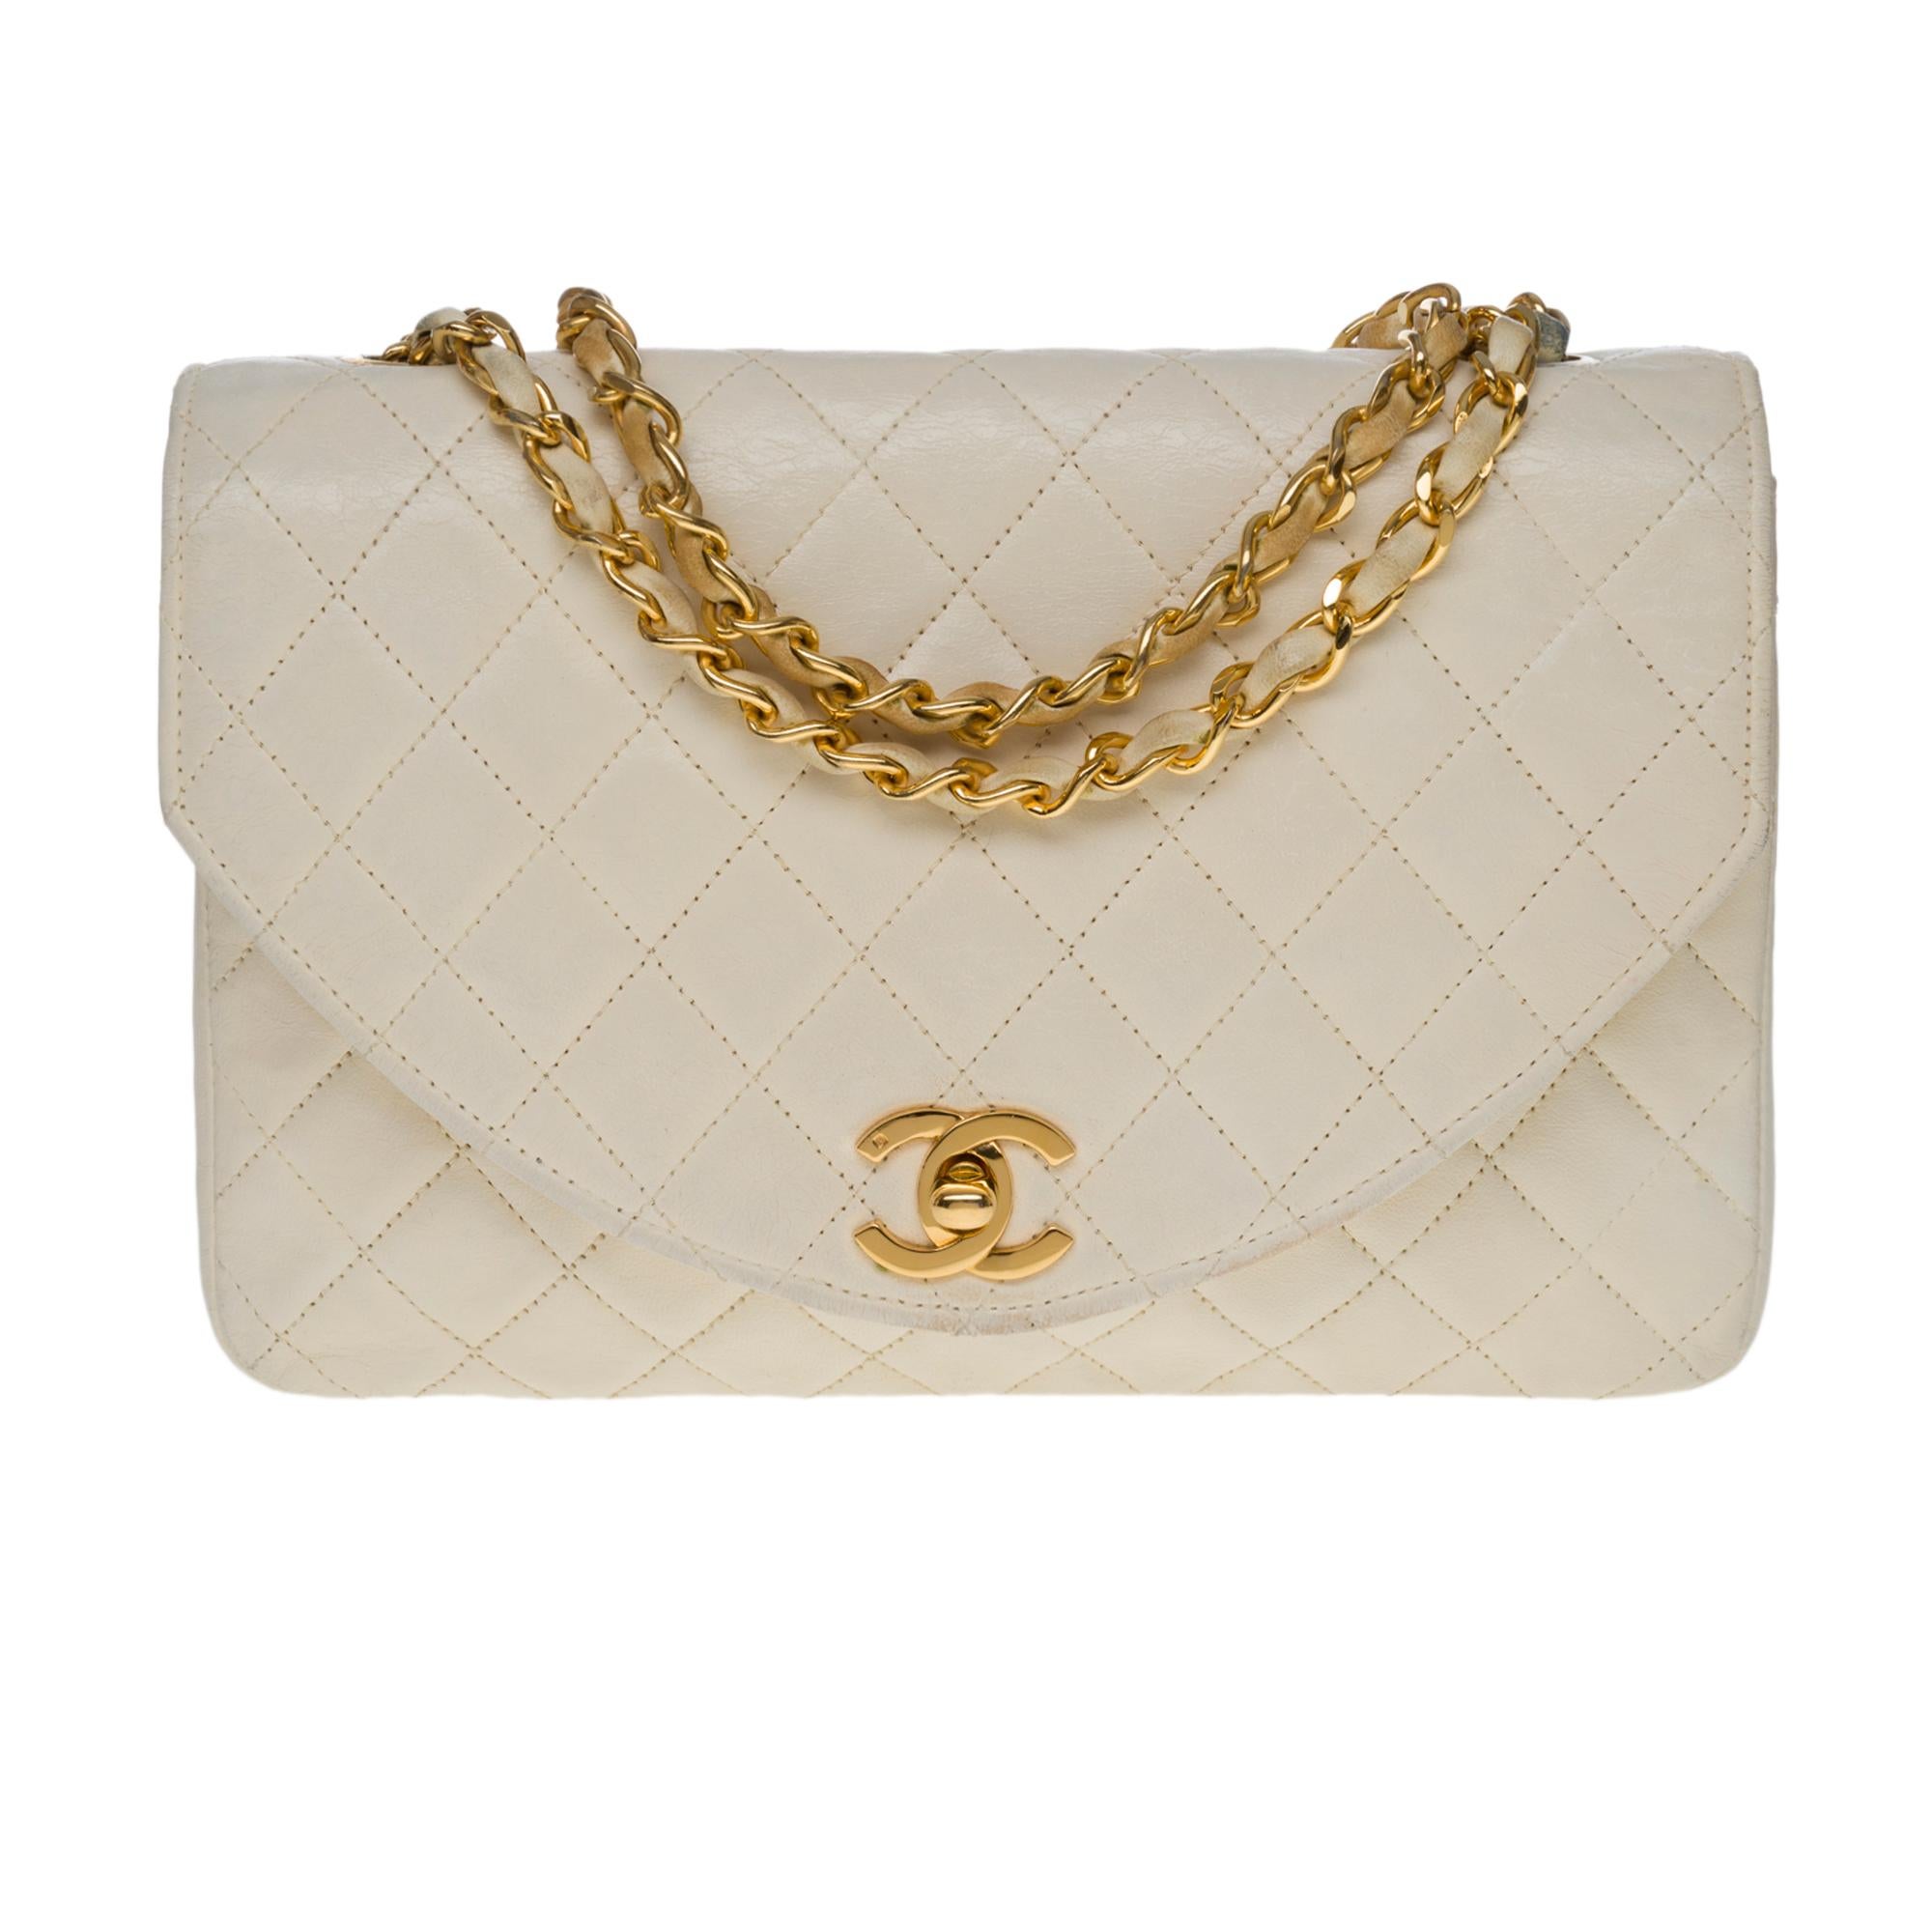 Beautiful Chanel Classic Flap bag in ecru quilted lambskin leather, gold-tone metal hardware, a gold-tone metal chain handle interlaced with ecru leather allowing a shoulder and shoulder strap
Half-moon flap closure, gold CC logo clasp
Single